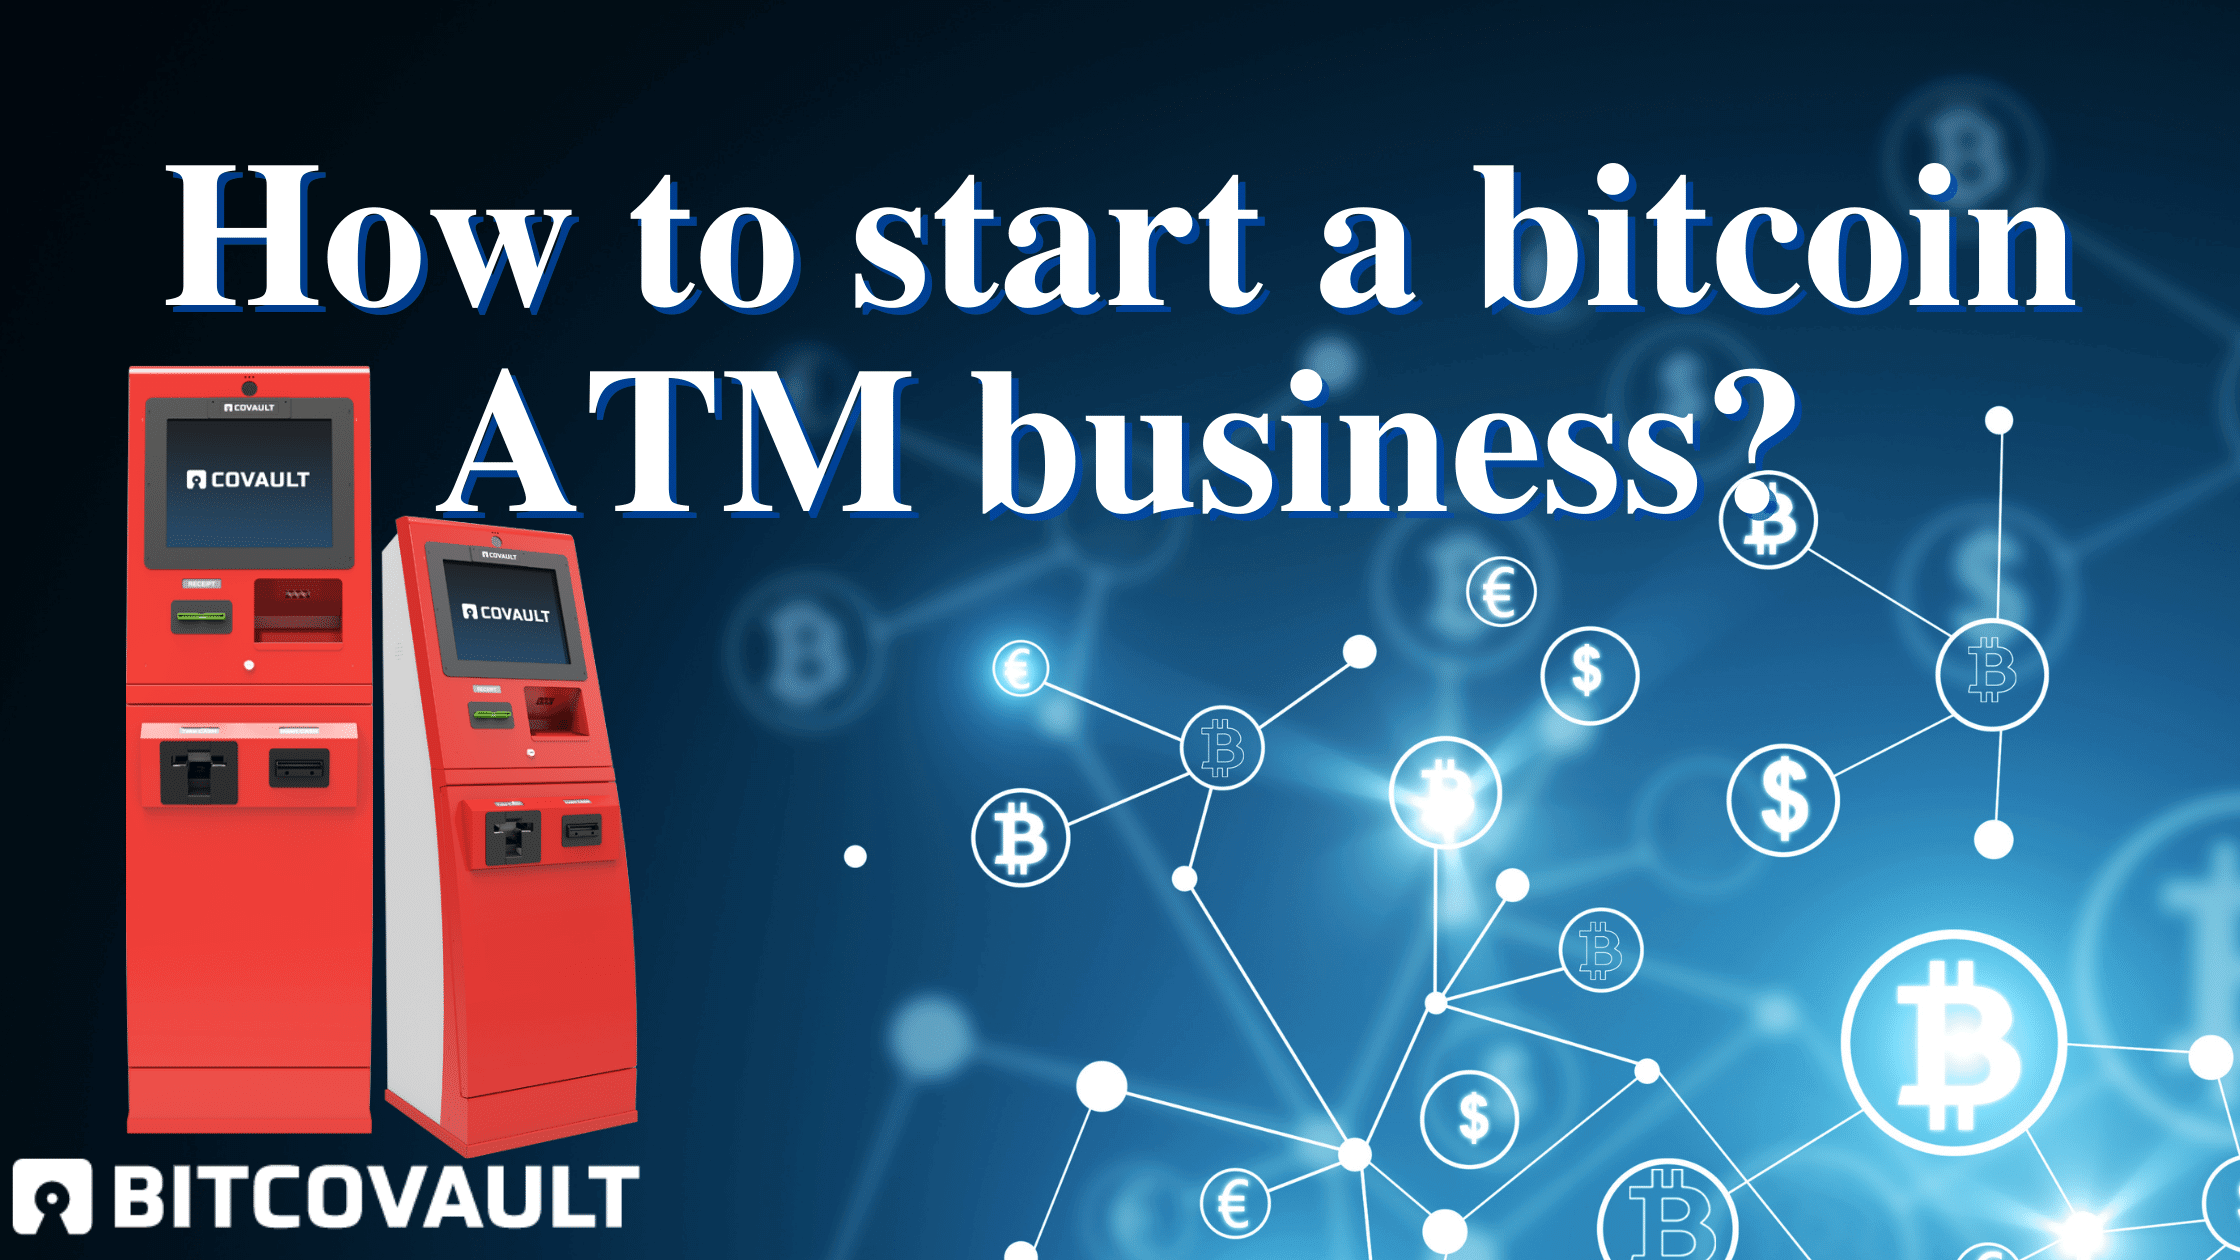 Are Bitcoin ATMs Profitable? - ChainBytes